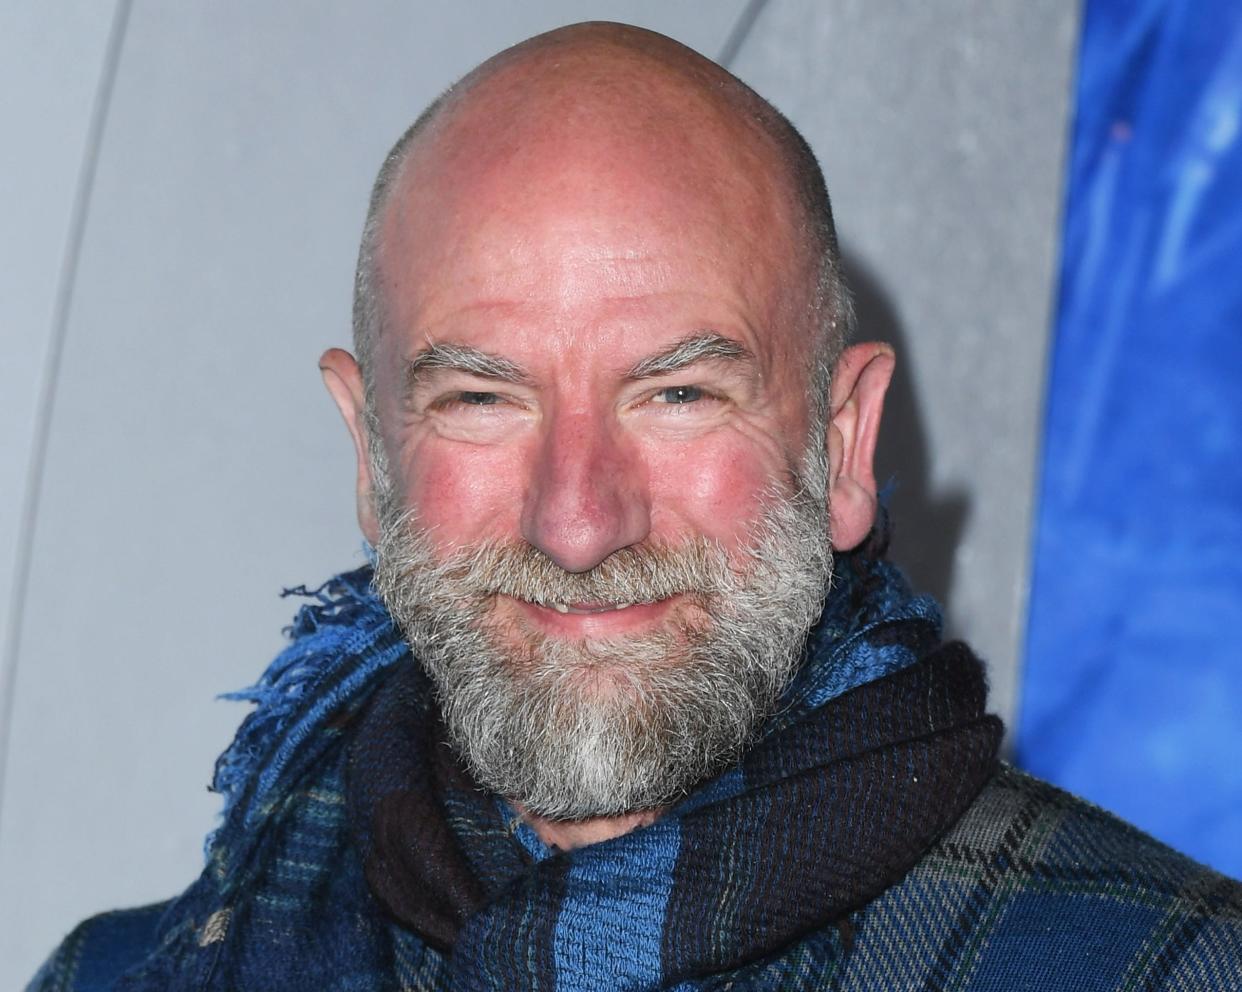 Actor Graham McTavish, of "Aquaman," is known for his role as Dwalin in "The Hobbit" films, as well as Dougal MacKenzie in "Outlander" and The Saint of Killers in "Preacher."